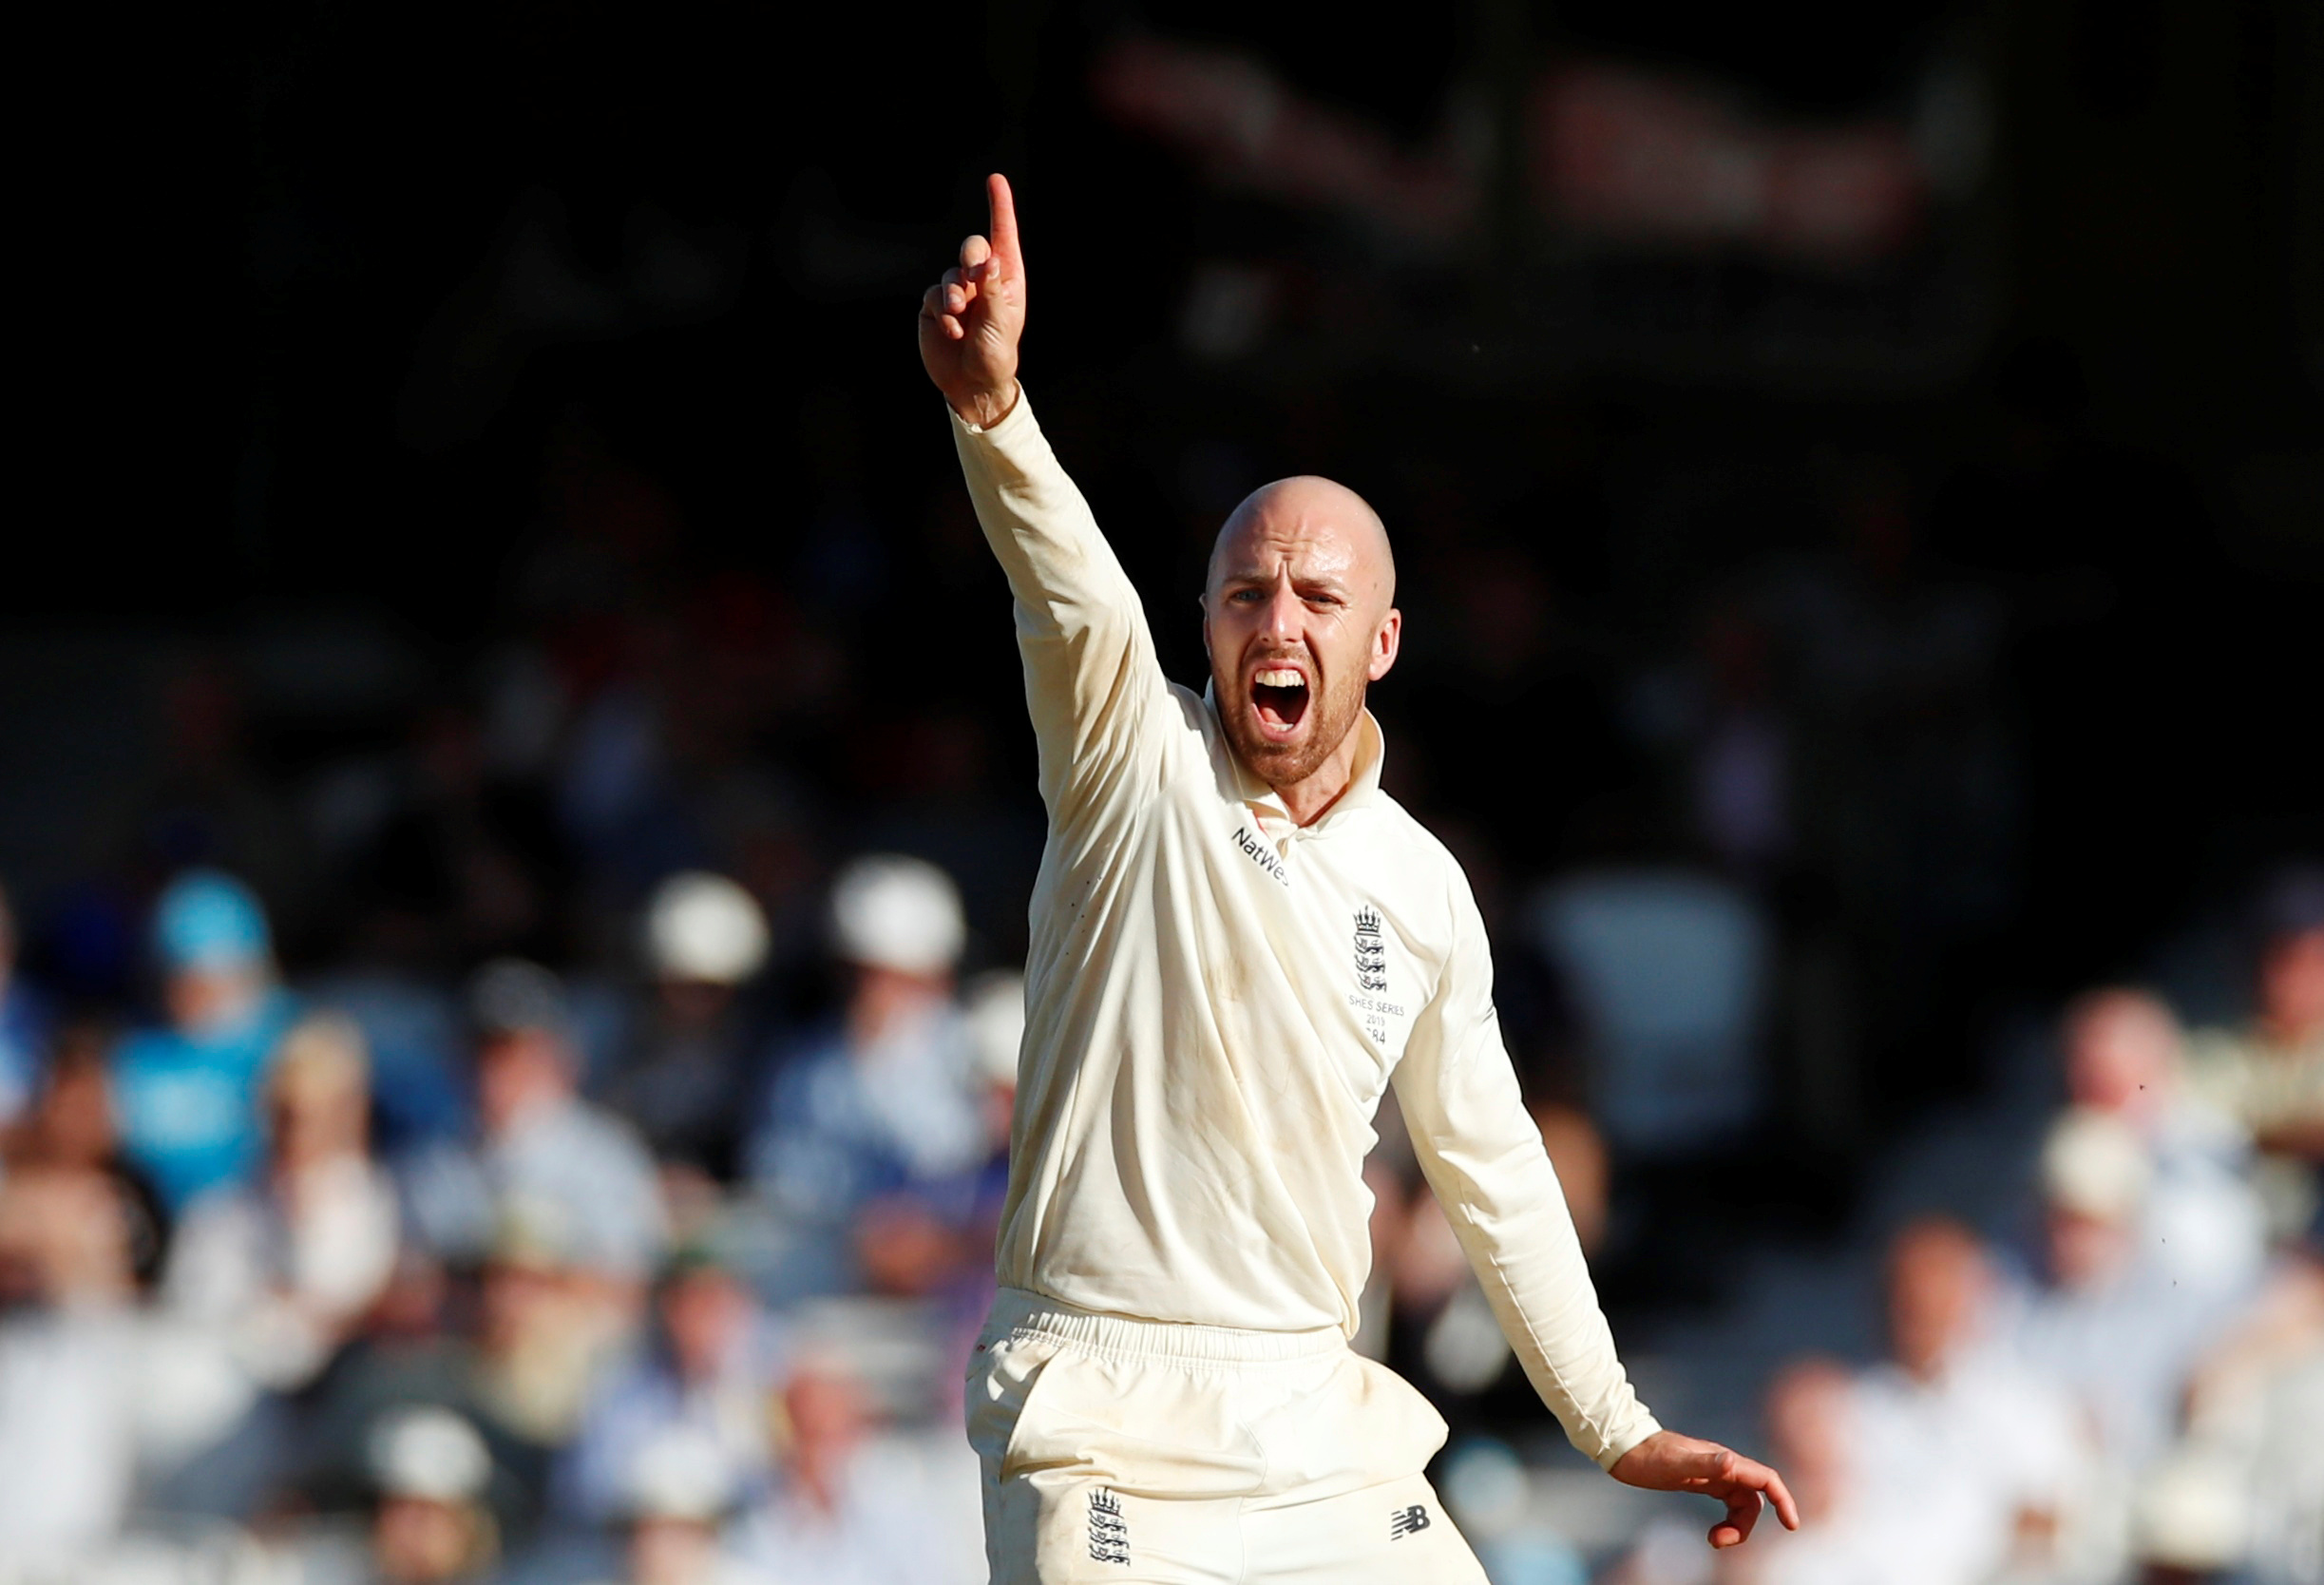 Cricket - Ashes 2019 - Fifth Test - England v Australia - Kia Oval, London, Britain - September 15, 2019  England's Jack Leach successfully appeals for the wicket of Australia's Tim Paine   Action Images via Reuters/Andrew Boyers